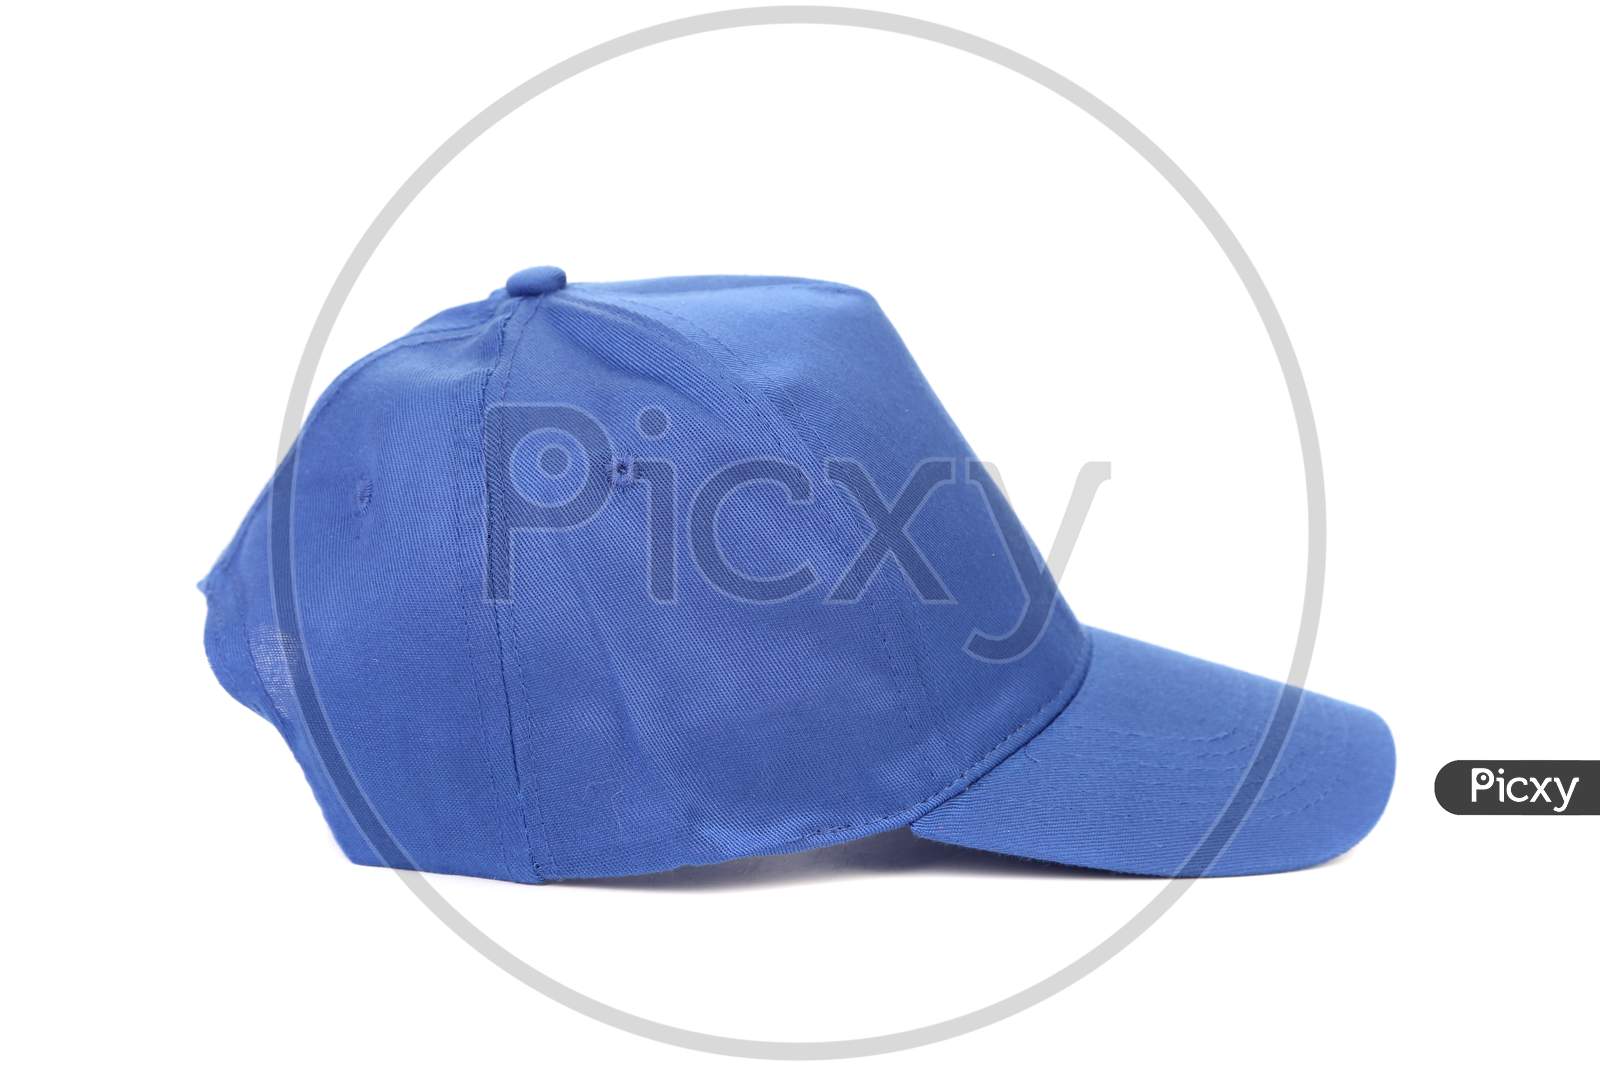 Working Peaked Cap. Isolated On A White Background.